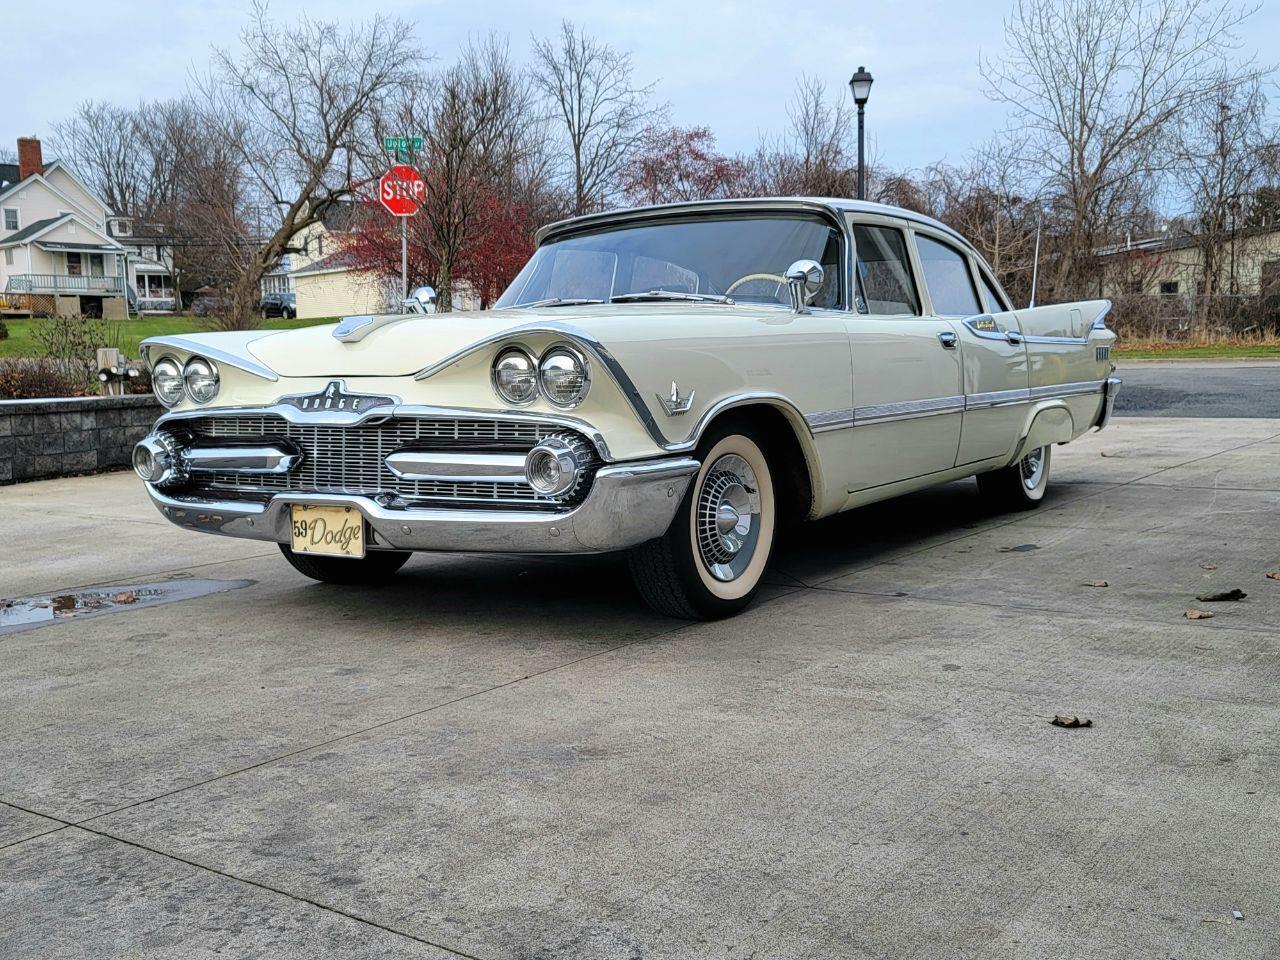 For Sale: 1959 Dodge Royal in Hilton, New York for sale in Hilton, NY